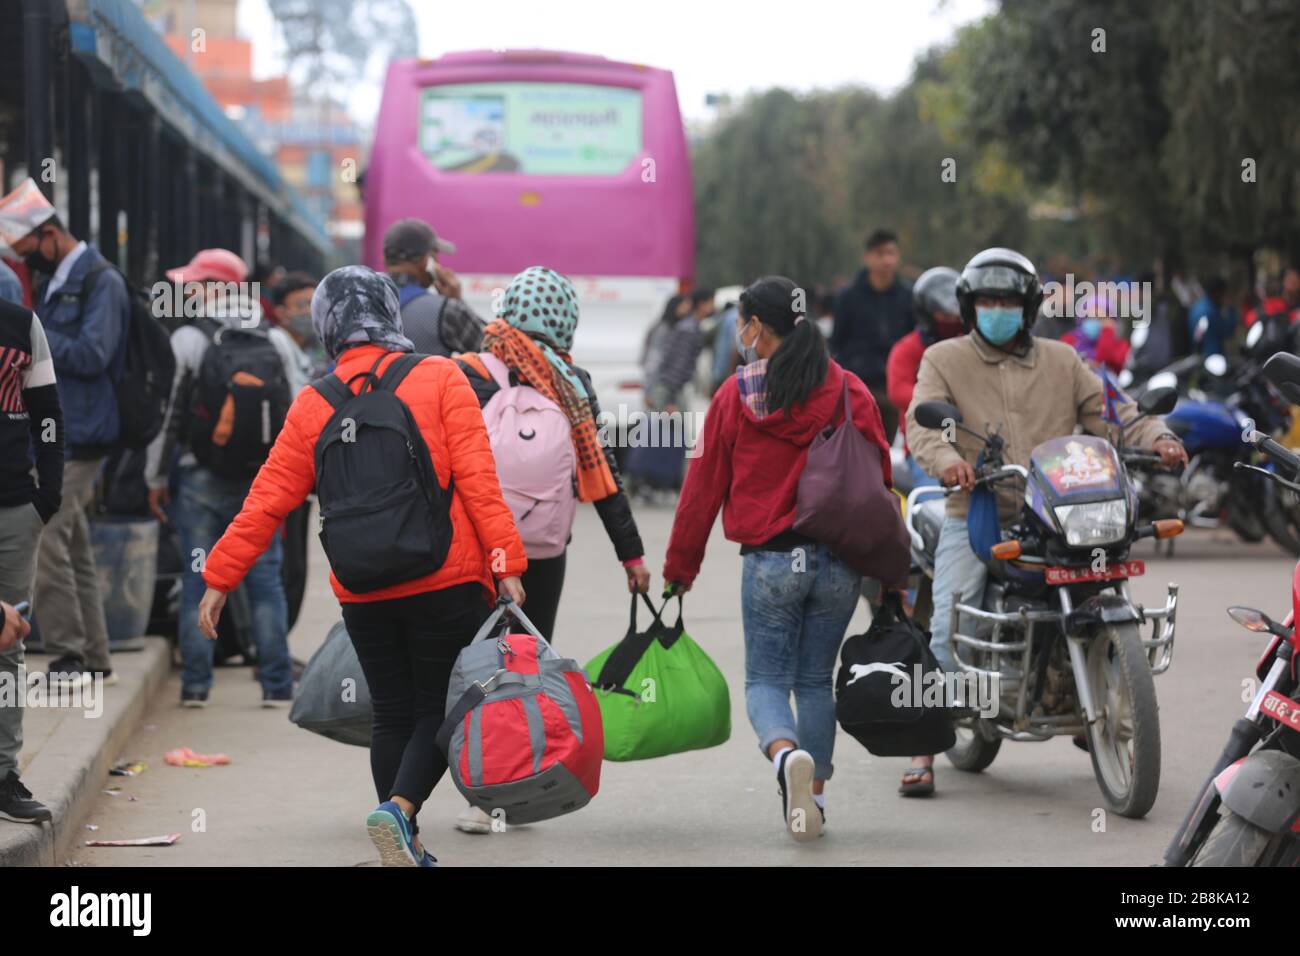 Kathmandu, Nepal. 22nd Mar, 2020. Passengers walk at a coach station in Kathmandu, Nepal, March 22, 2020. Nepali Prime Minister KP Sharma Oli on March 20 announced a number of prohibitive measures including suspension of long-distance transport operation amid COVID-19 outbreak. In an address to the nation on Friday evening, the prime minister announced that all the long-haul transportation services will be halted from March 23. Credit: Zhou Shengping/Xinhua/Alamy Live News Stock Photo